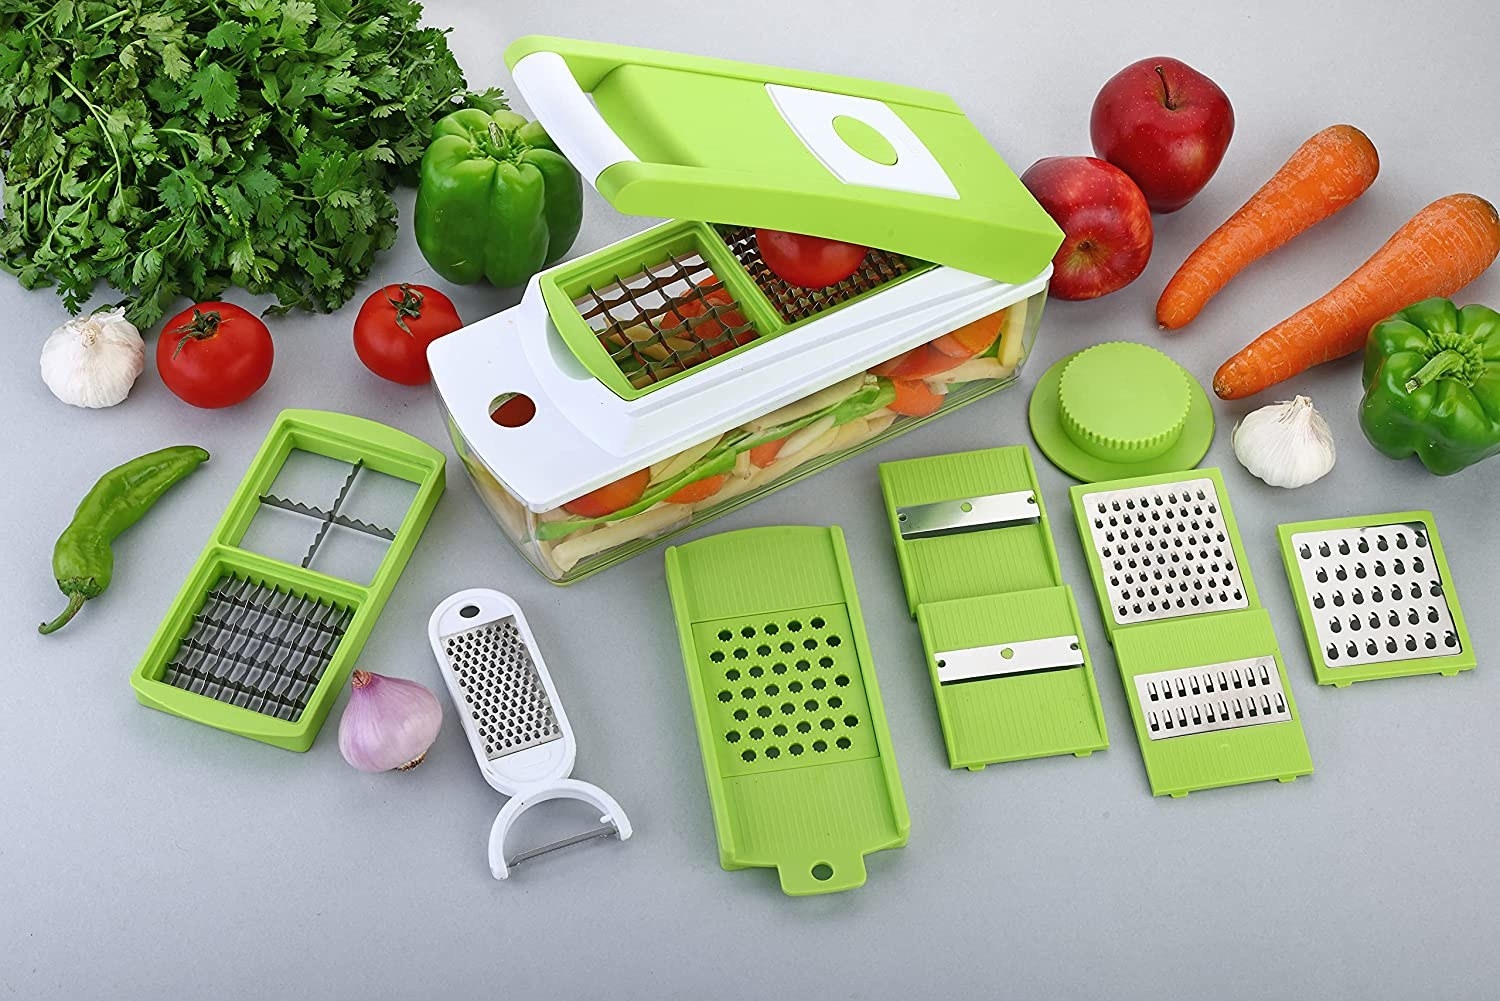 A vegetable chopper with various attachments near it and some vegetables